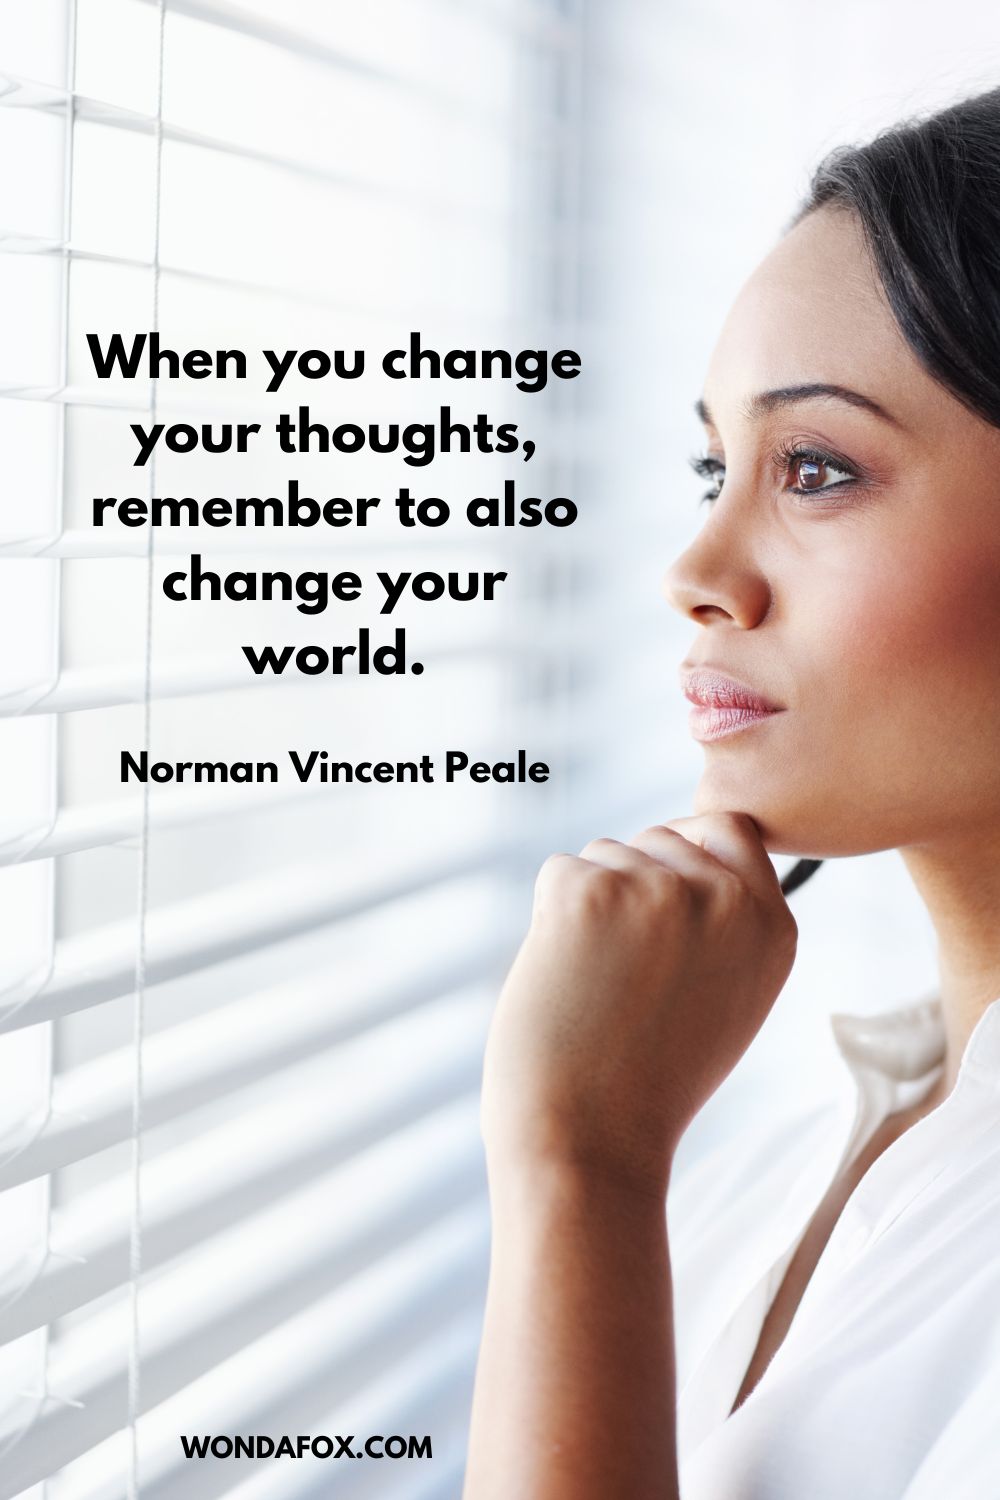 When you change your thoughts, remember to also change your world. Norman Vincent Peale